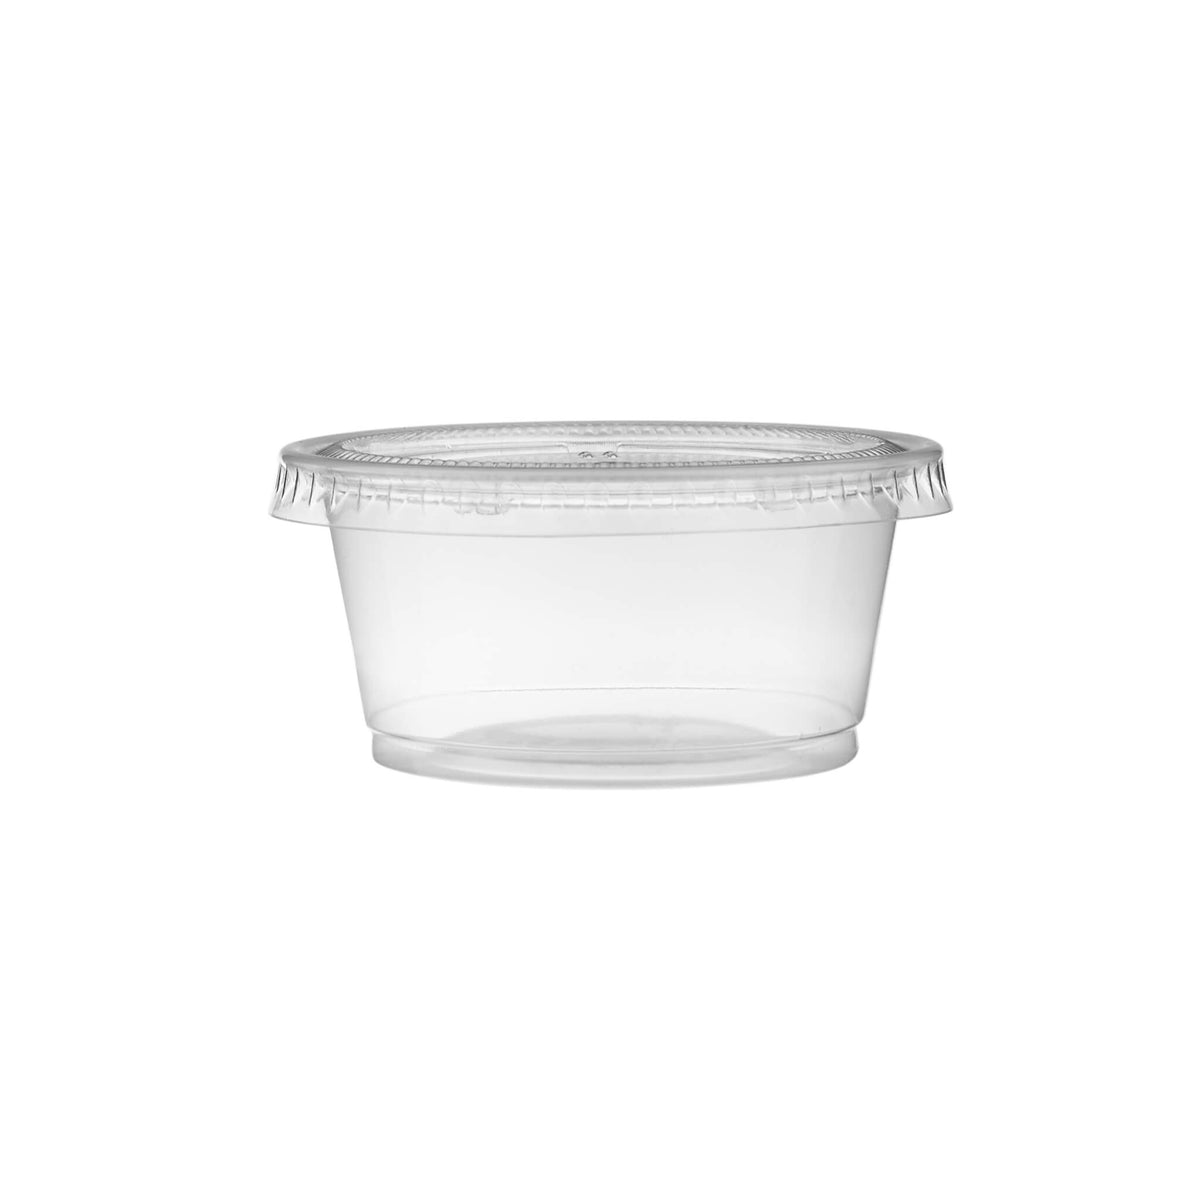 2 Oz clear portion cup - Hotpack Global